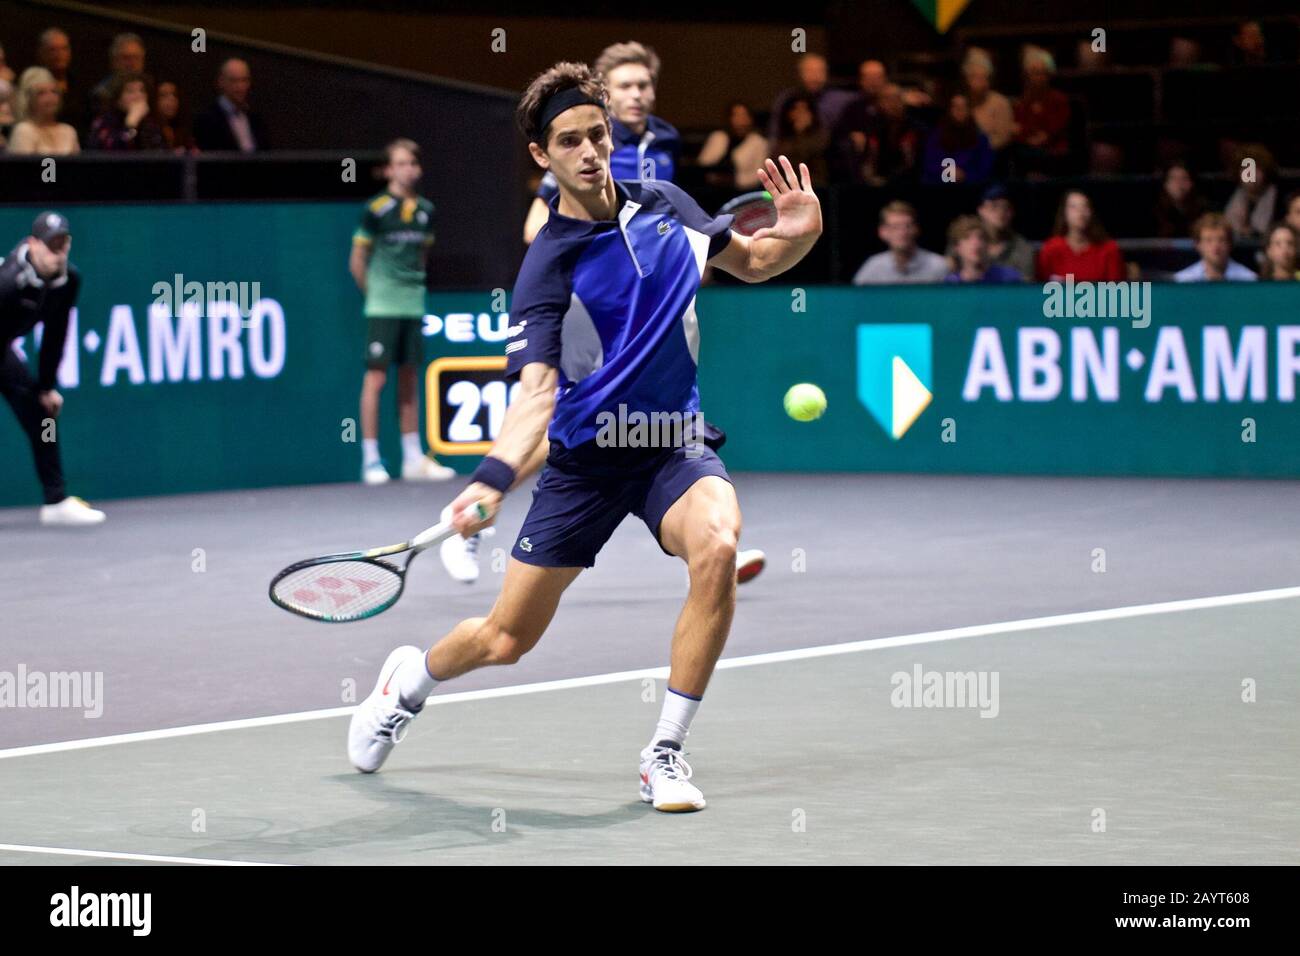 Rotterdam, The Netherlands. 16th Feb, 2020. Nicolas Mahut and Pierre-Hugues  Herbert (front) of France compete during the doubles final match against  Henri Kontinen of Finland and Jan-Lennard Struff of Germany at the